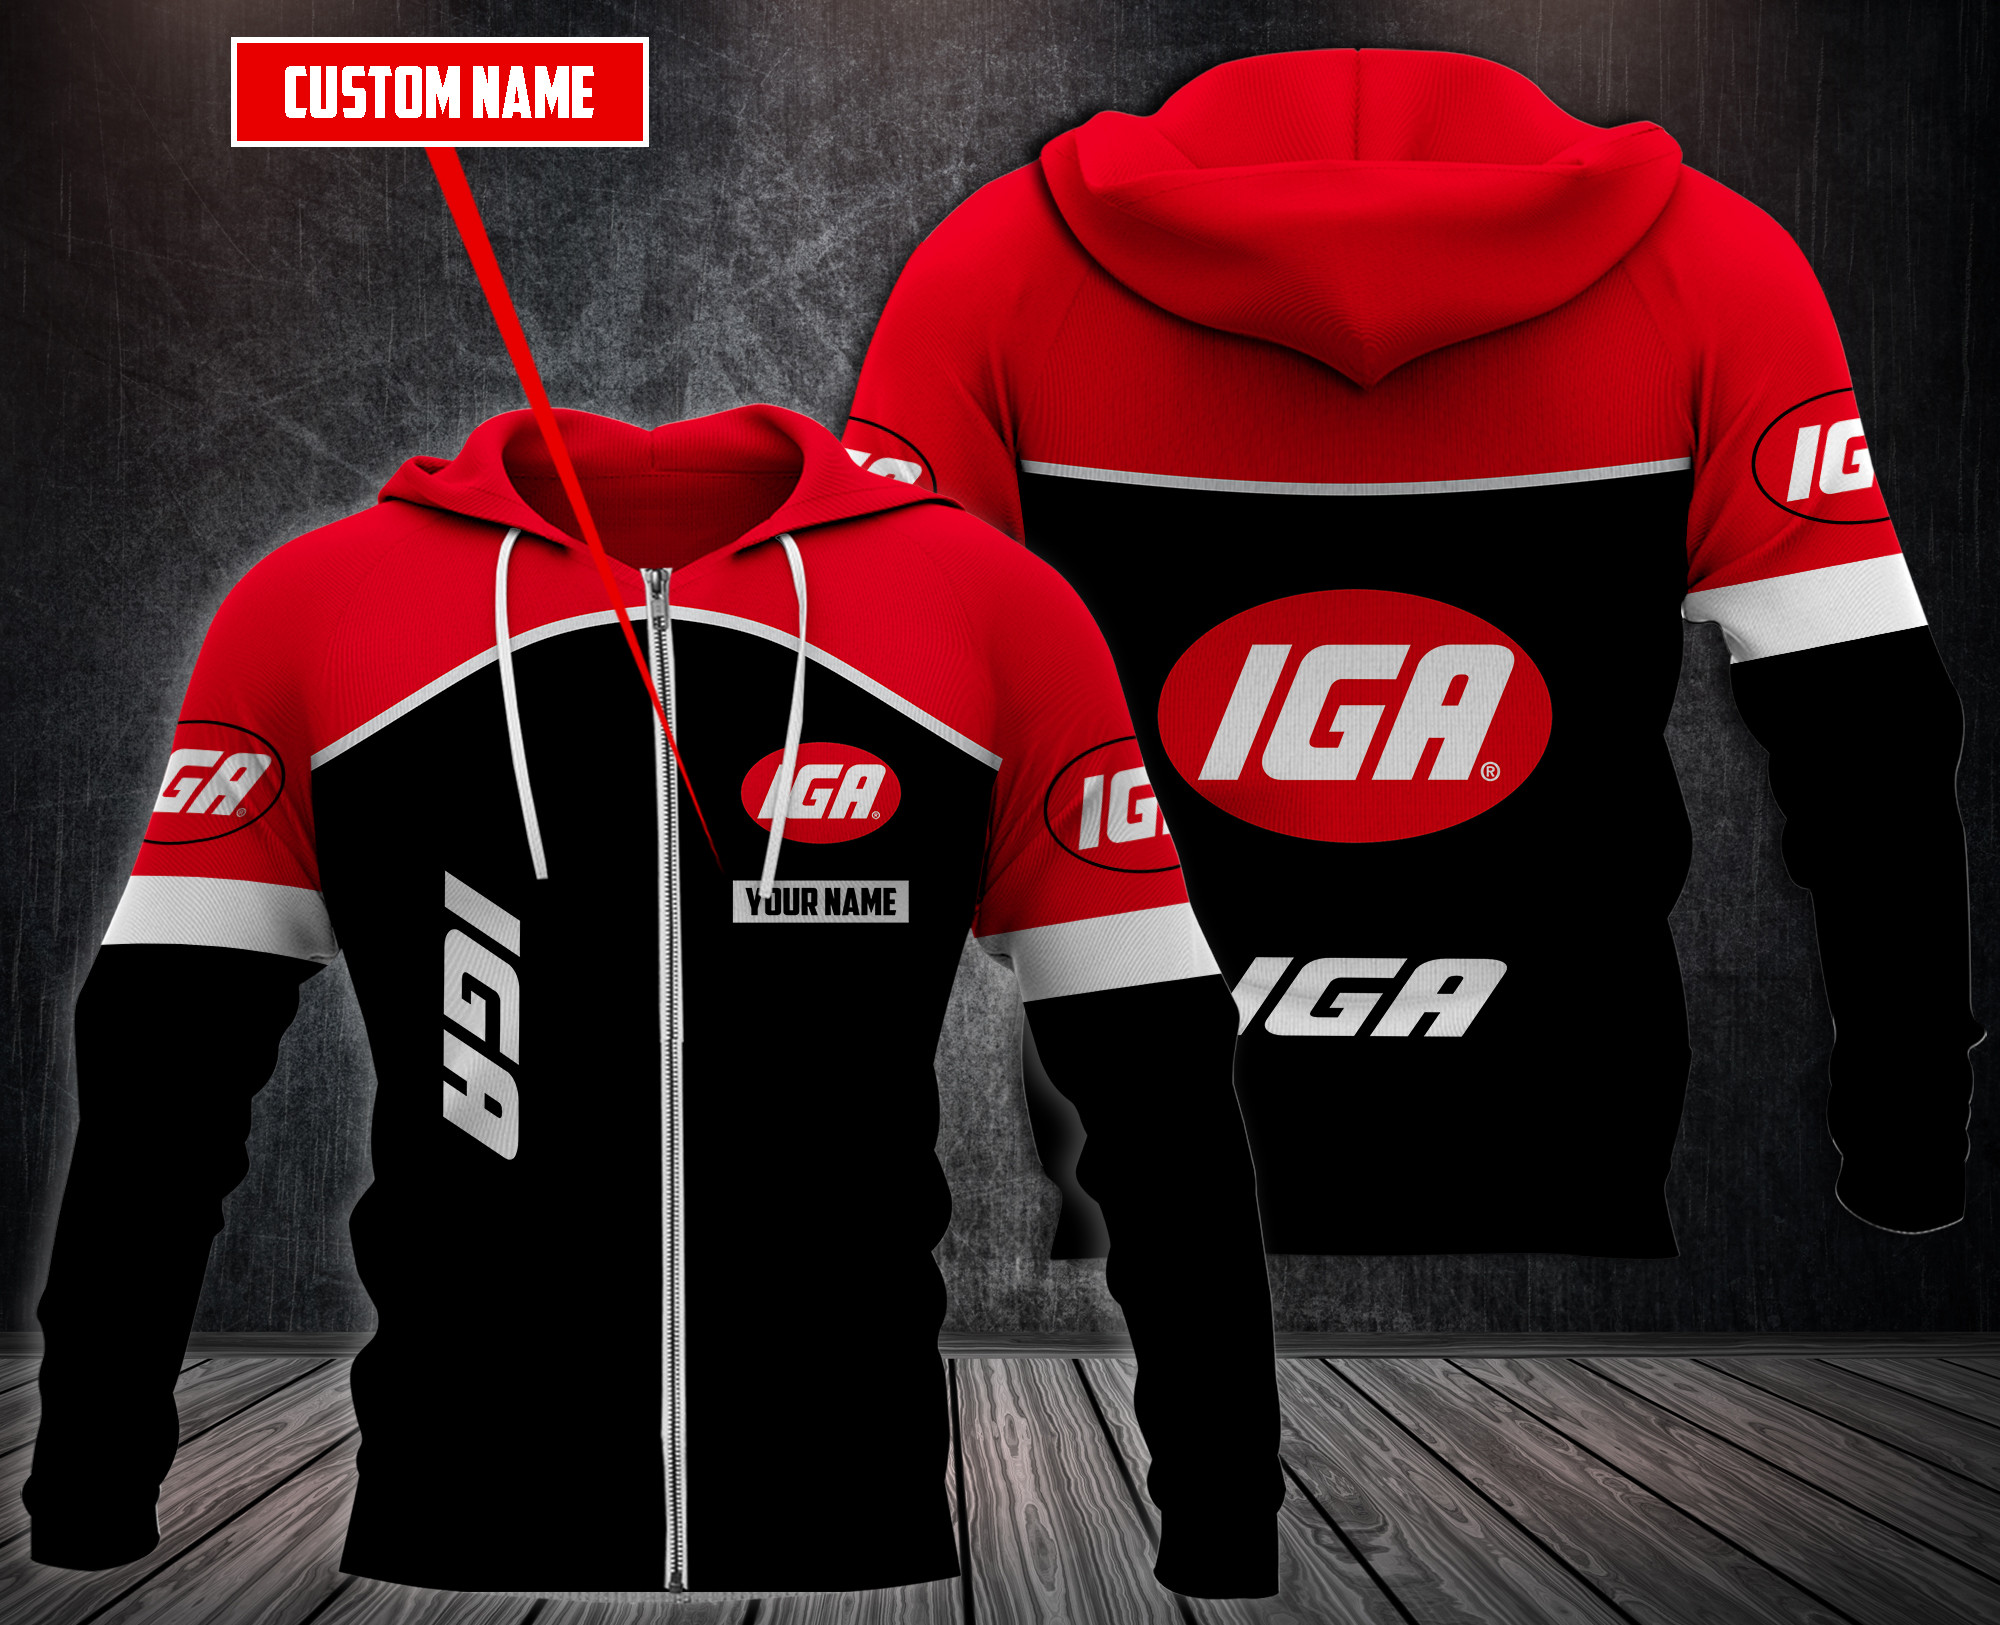 Choose the right hoodies for you on our boxboxshirt and ethershirt websites in 2022 53